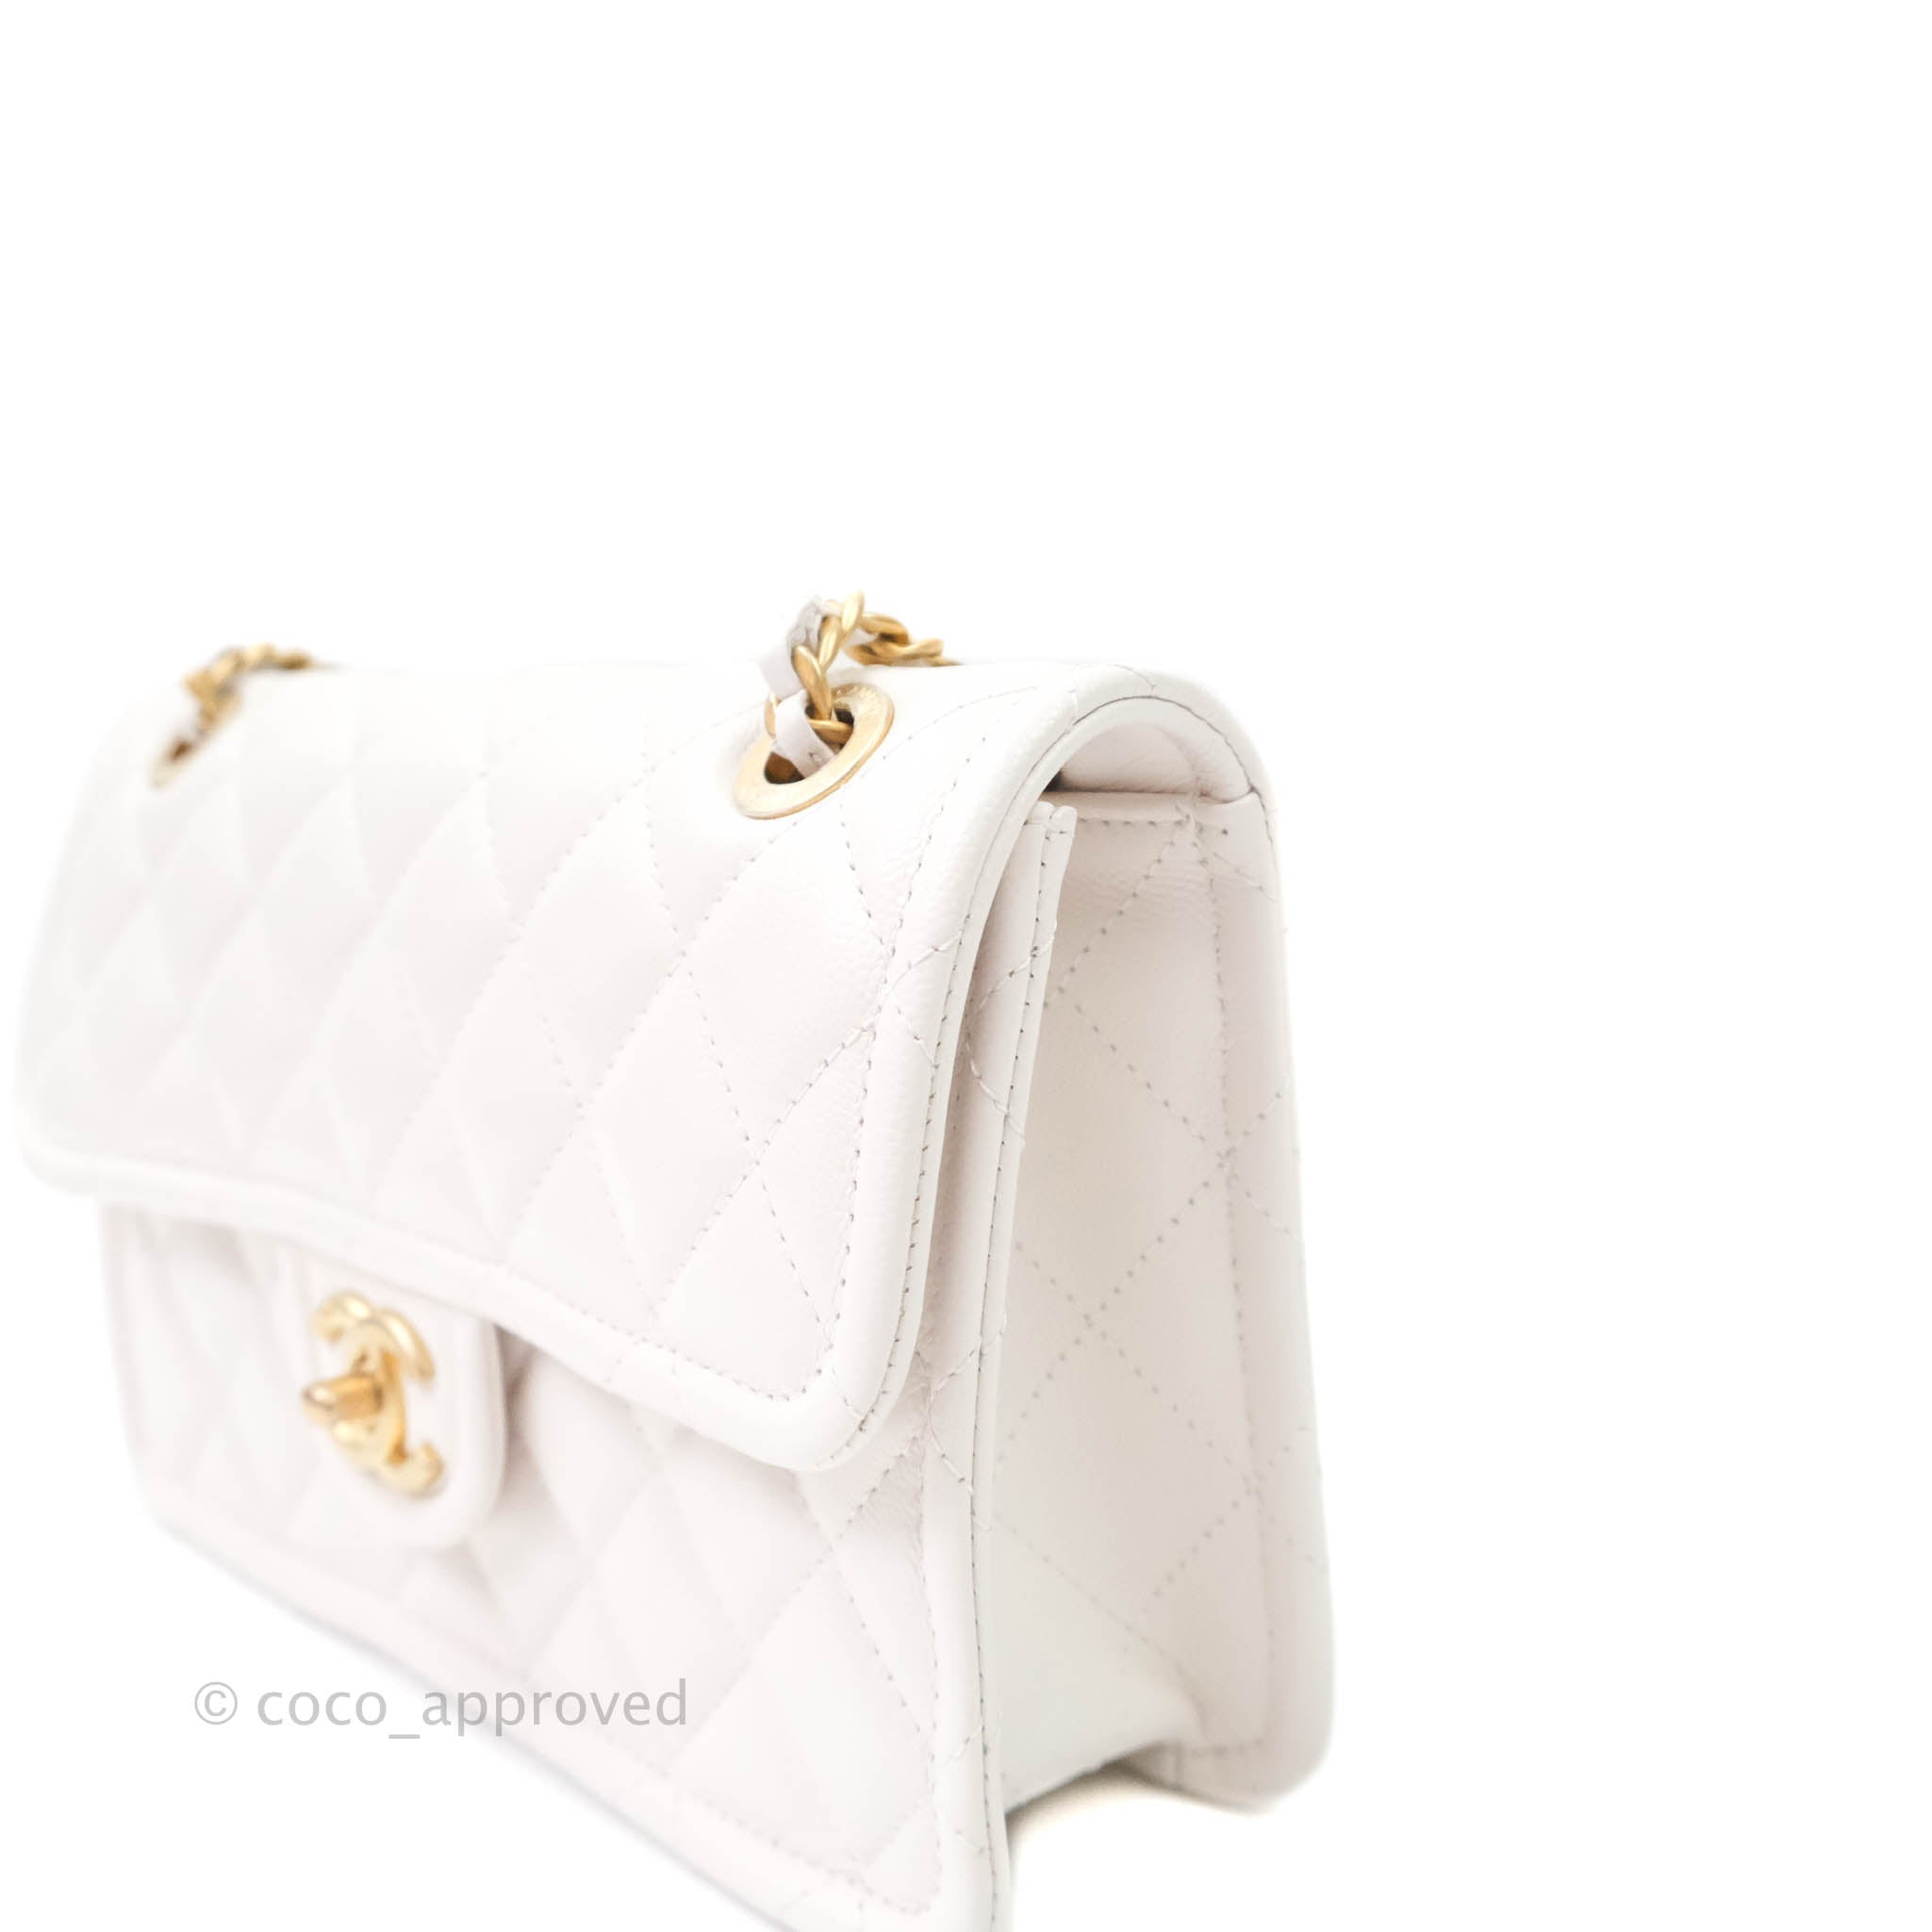 CHANELMetiersdArt: Two Adorable 'Vanity With Chain' Bags In Two Sizes -  BAGAHOLICBOY